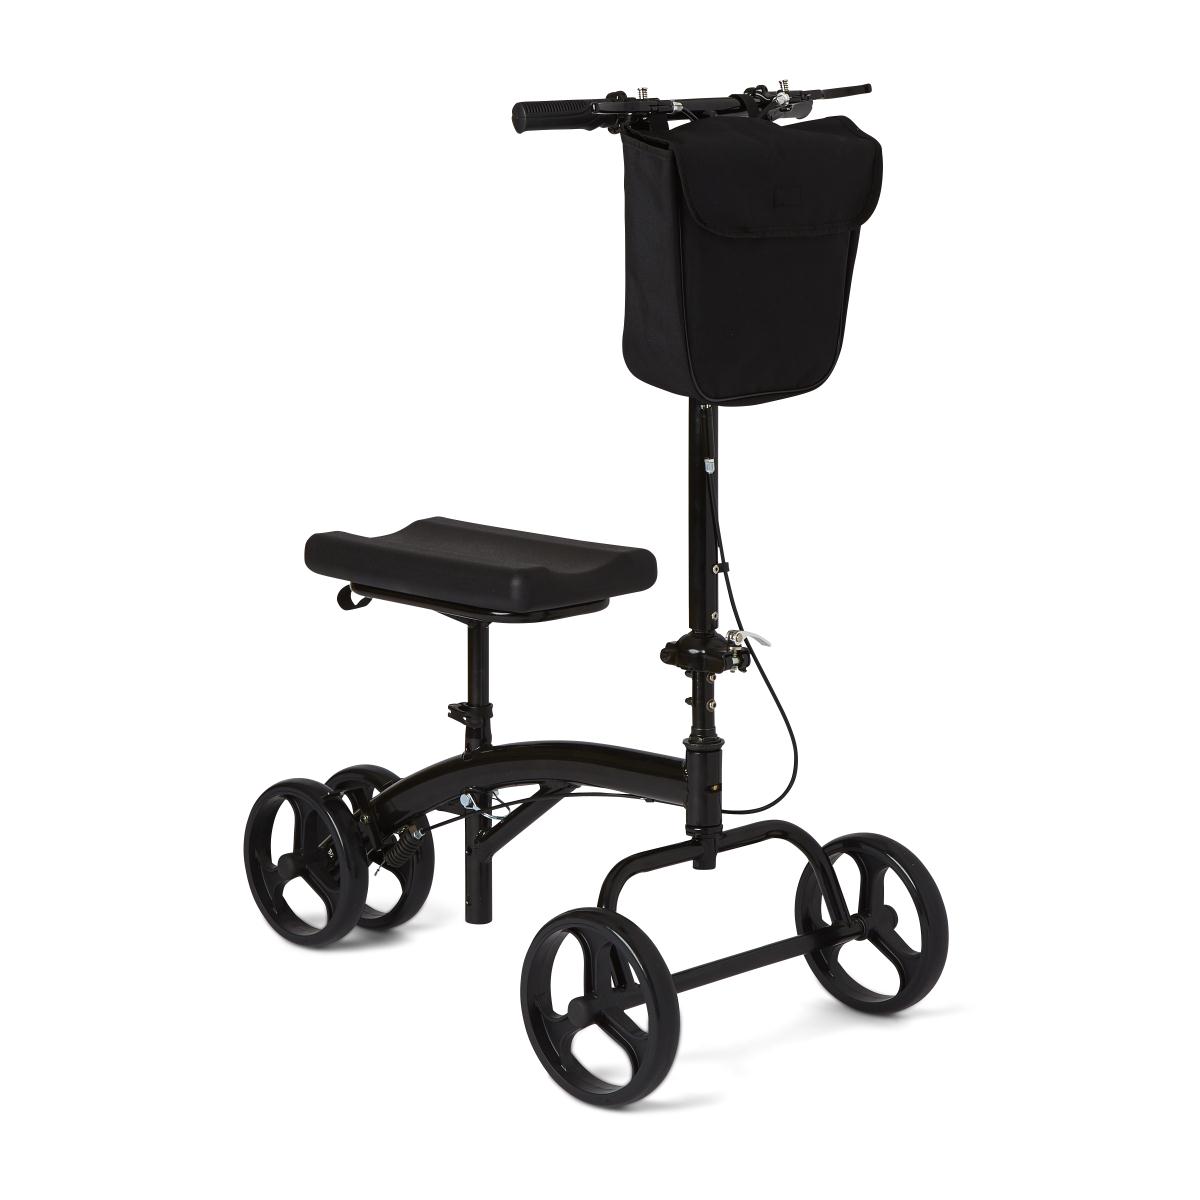 1 Each-Each / Black / 300.00 LB Patient Safety & Mobility - MEDLINE - Wasatch Medical Supply